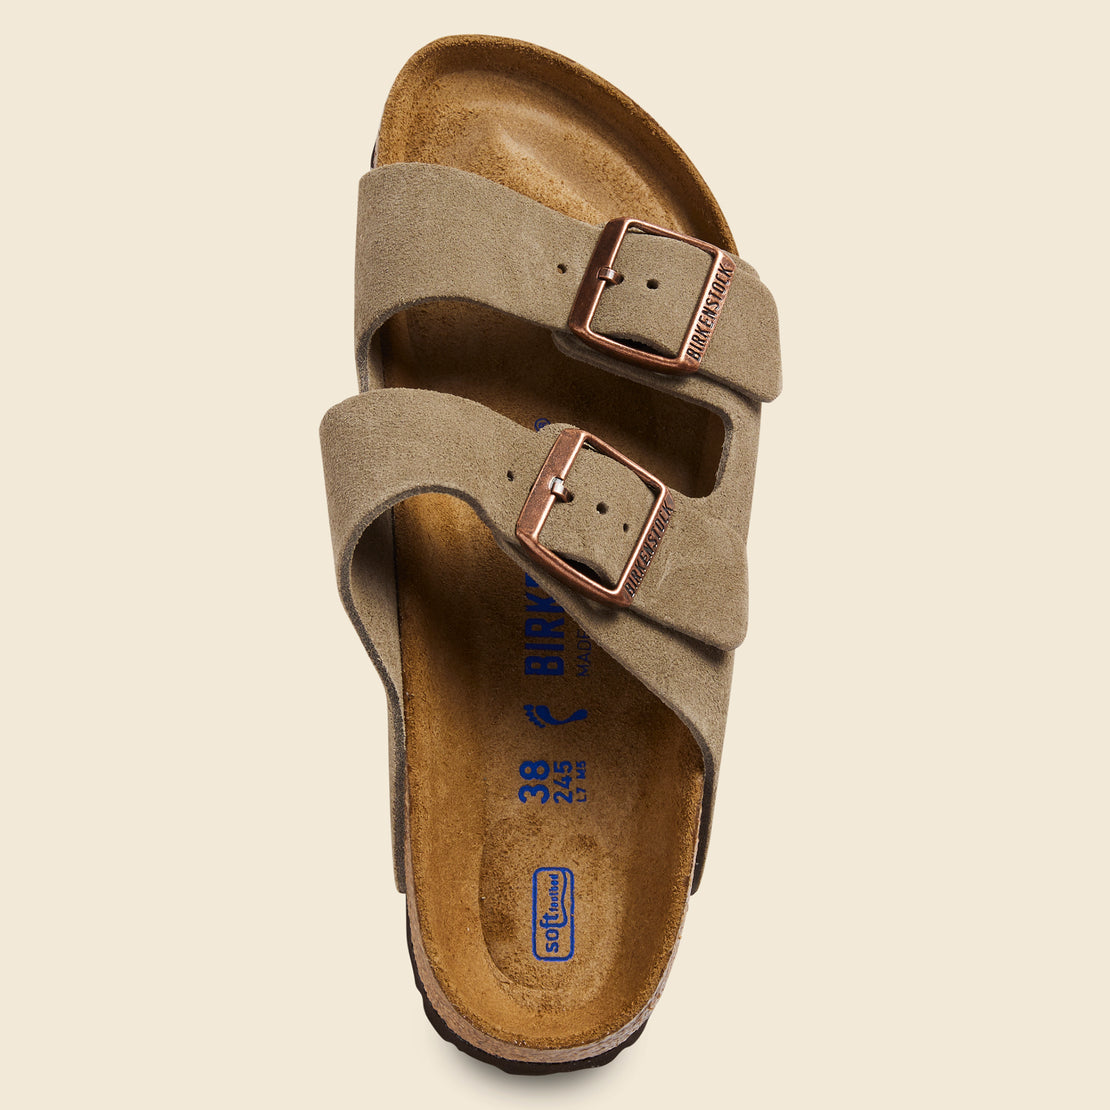 Arizona Soft Footbed - Taupe Suede